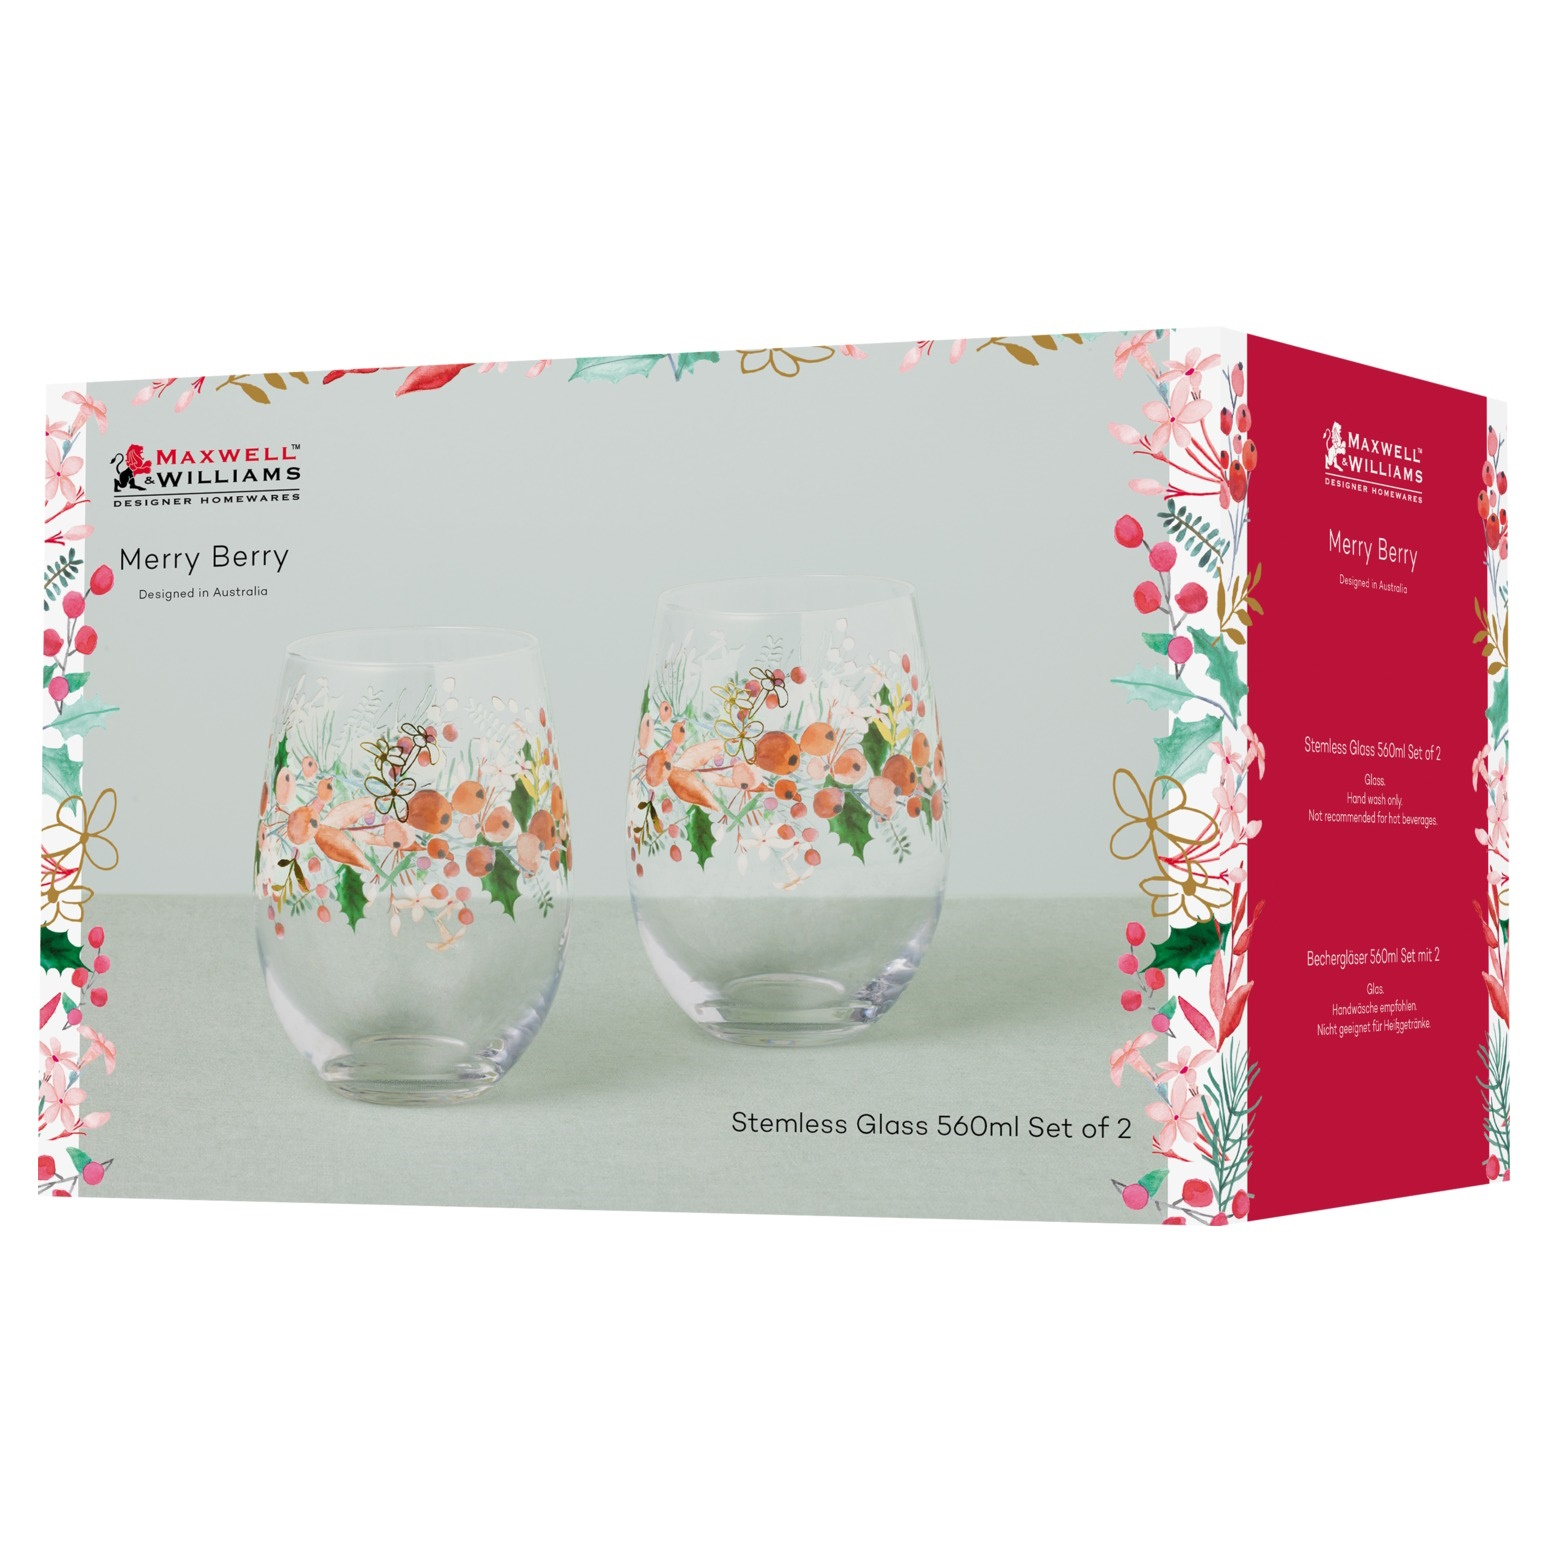 Maxwell & Williams Merry Berry Stemless Glass 560ML Set of 2 Gift Boxed